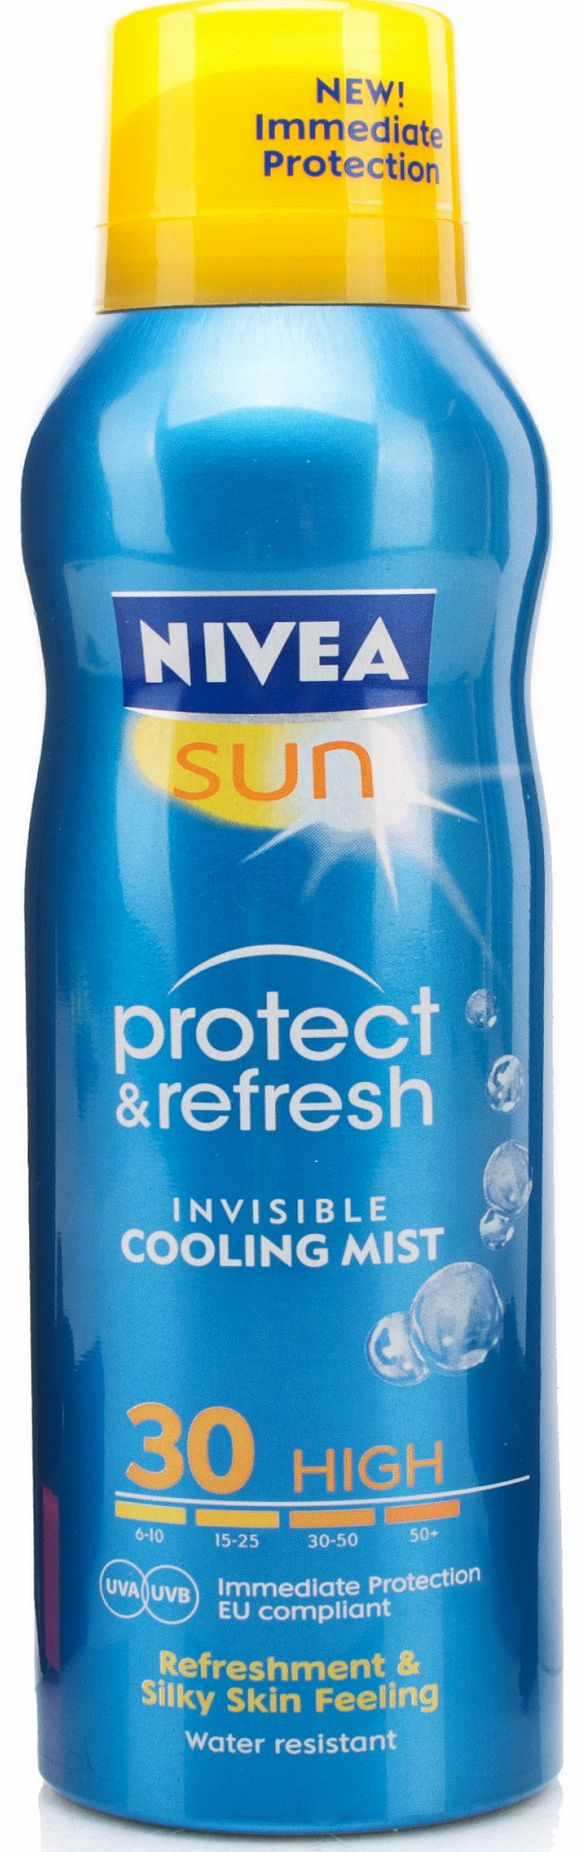 Sun Protect & Refresh Invisible Cooling